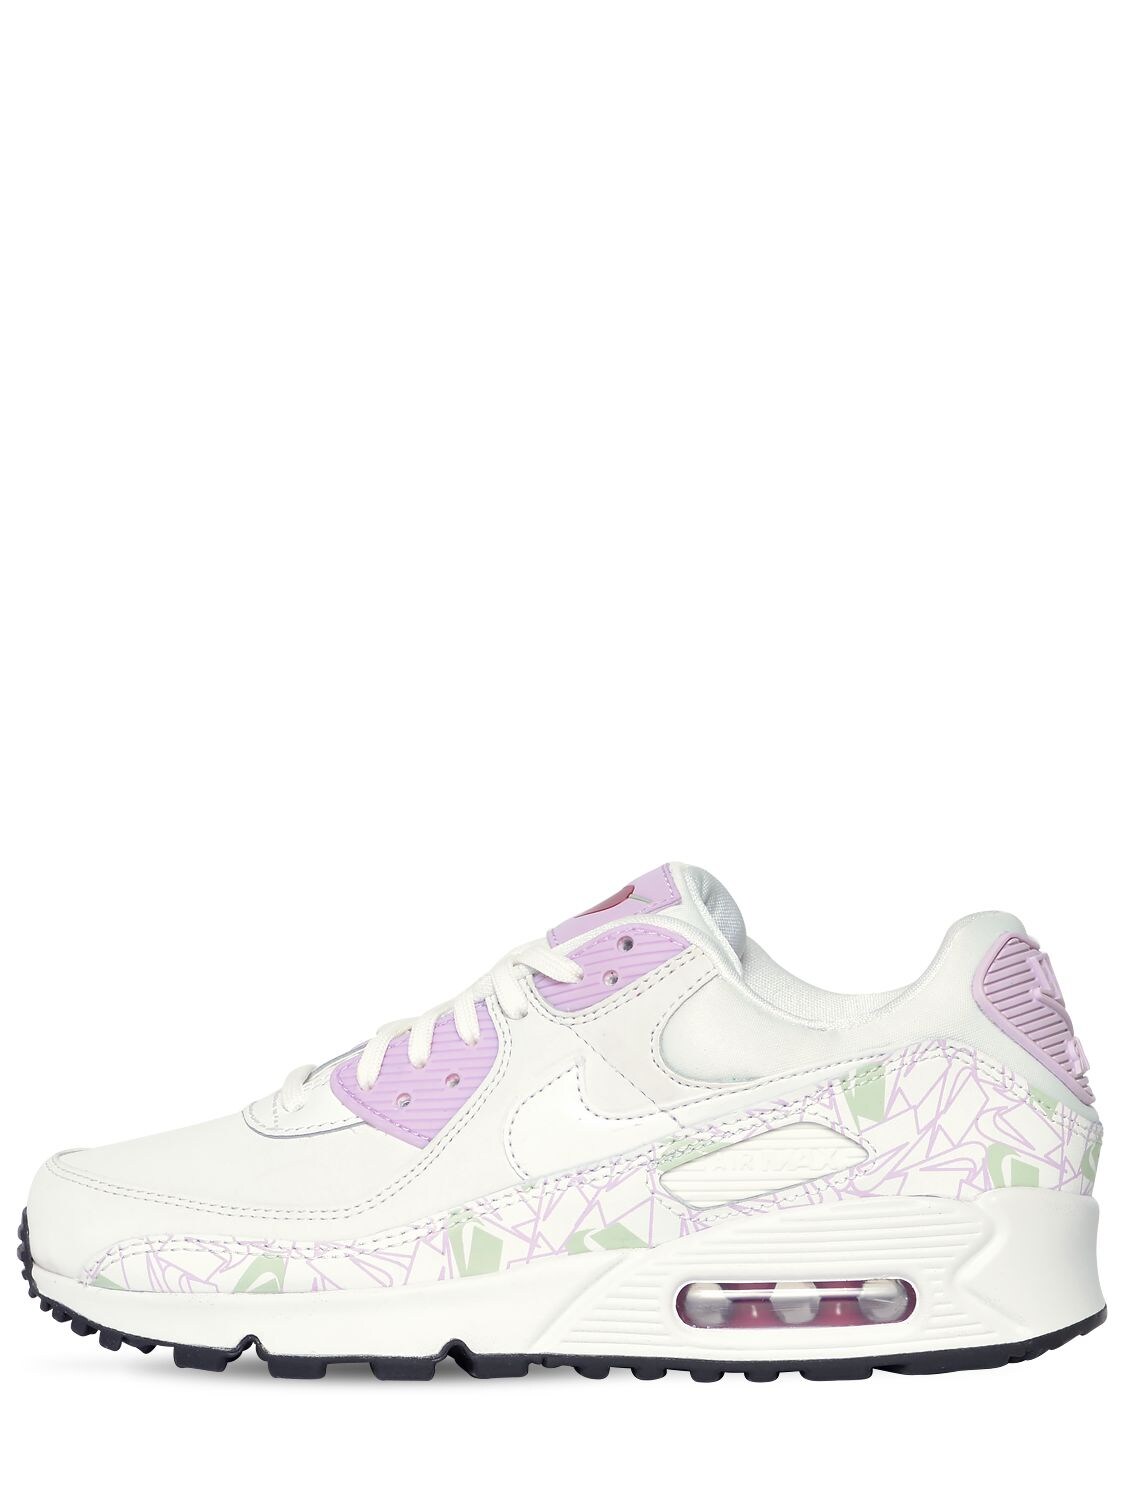 Nike Air Max 90 Vday Sneakers In White,pink,gree